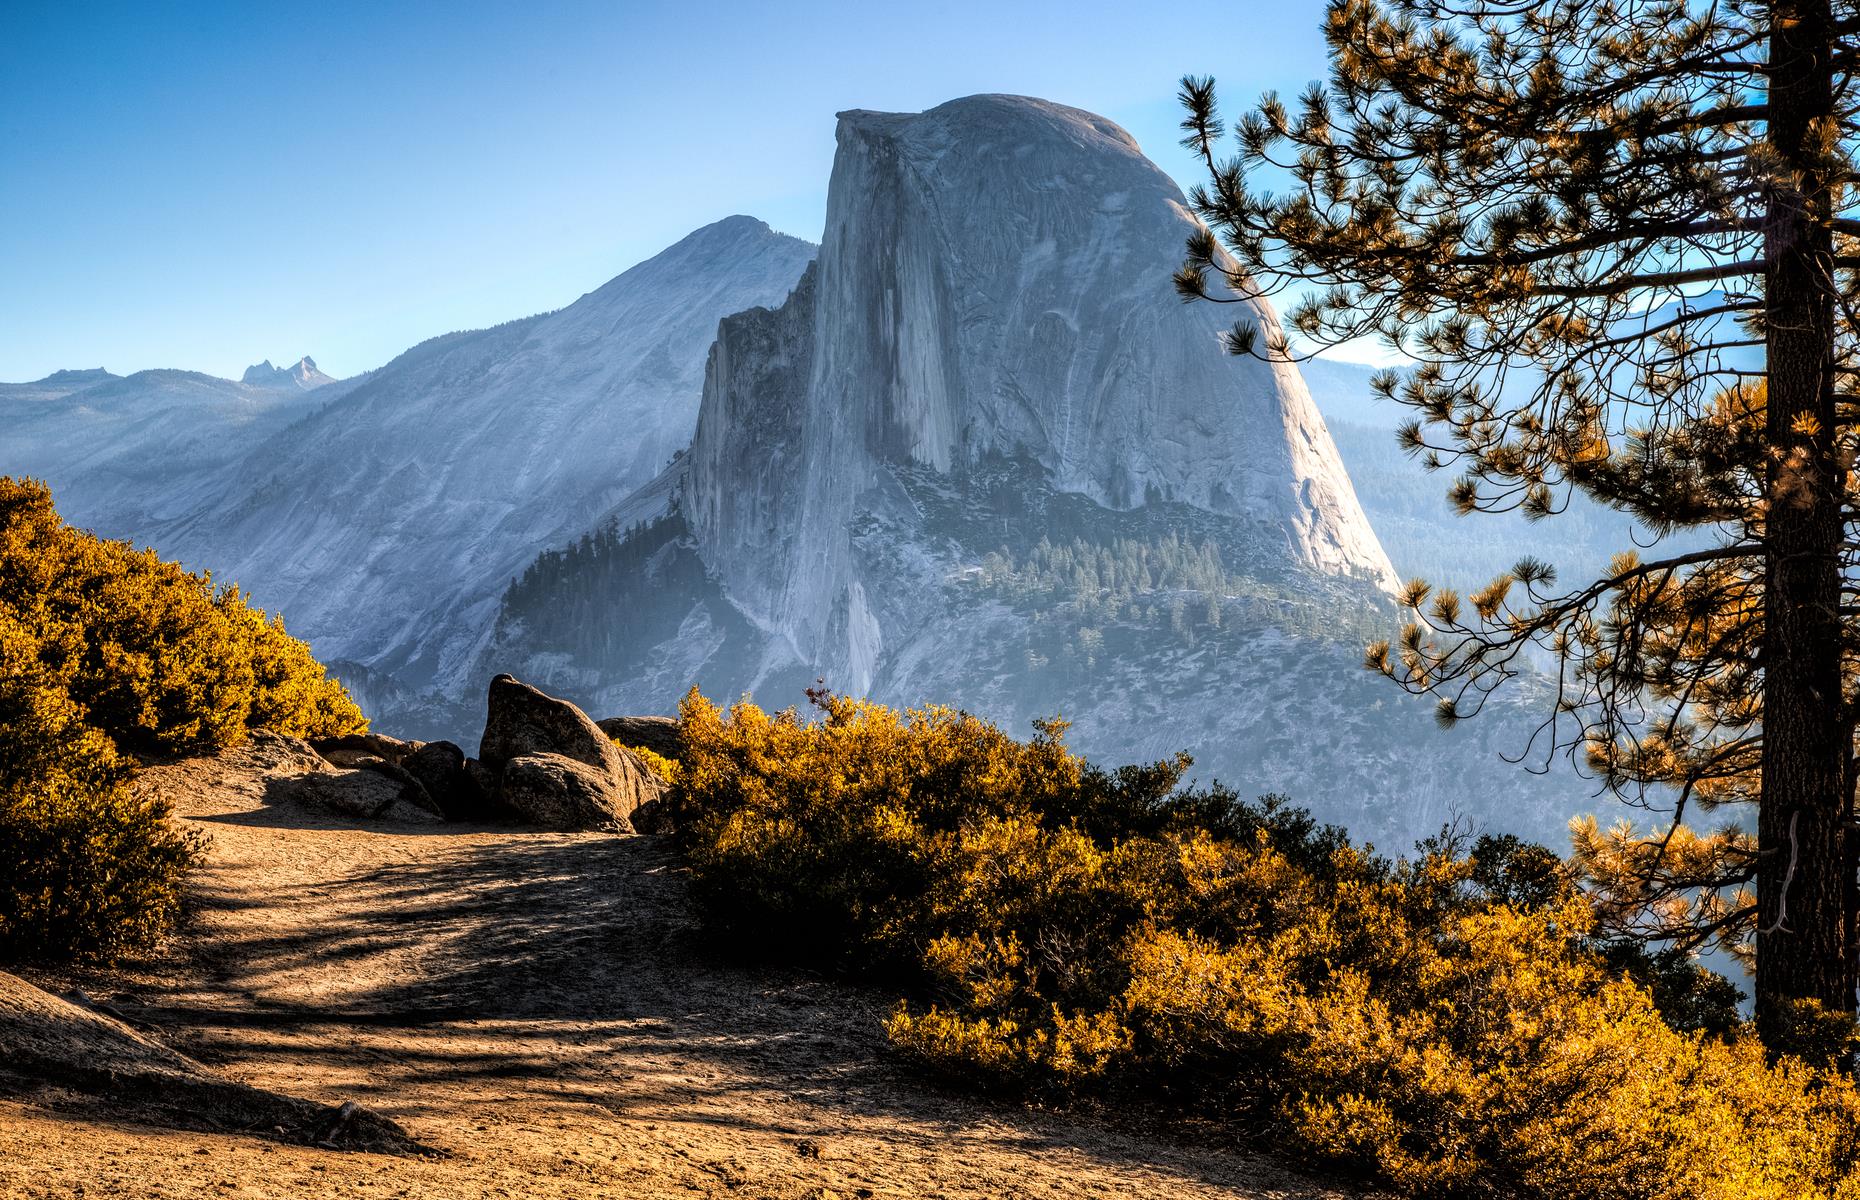 <p>The most famous image of <a href="https://www.nps.gov/yose/index.htm">Yosemite National Park</a>, Half Dome's distinctive bulk rises some 5,000 feet (1,524m) above the valley floor. Reaching the summit is no small feat and the 16-mile (26km) round-trip route is best left to competent hikers. It should take around 12 hours, with a near-vertical 400-foot (122m) cabled section taking you to the very top. If you'd prefer to drink in the famous rock face from a distance, Glacier Point offers views of Half Dome and some spectacular waterfalls.</p>